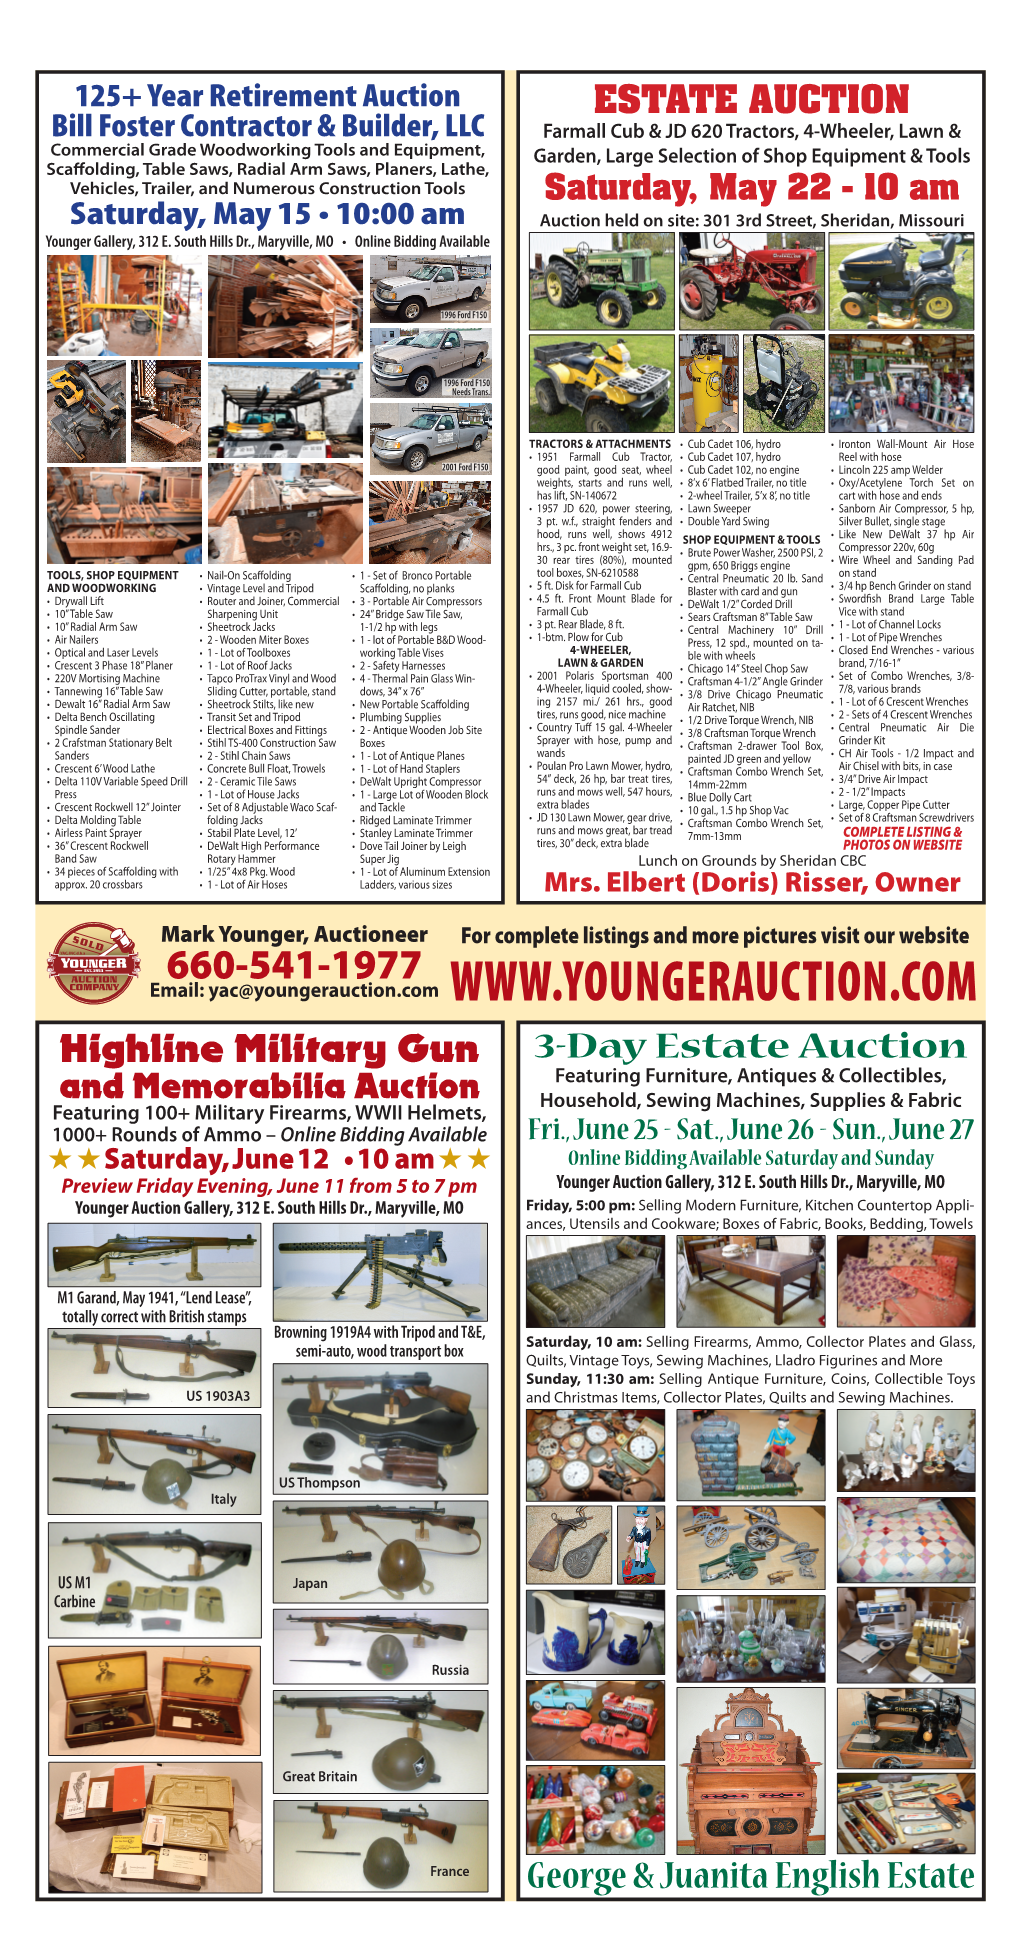 125+ Year Retirement Auction Bill Foster Contractor & Builder